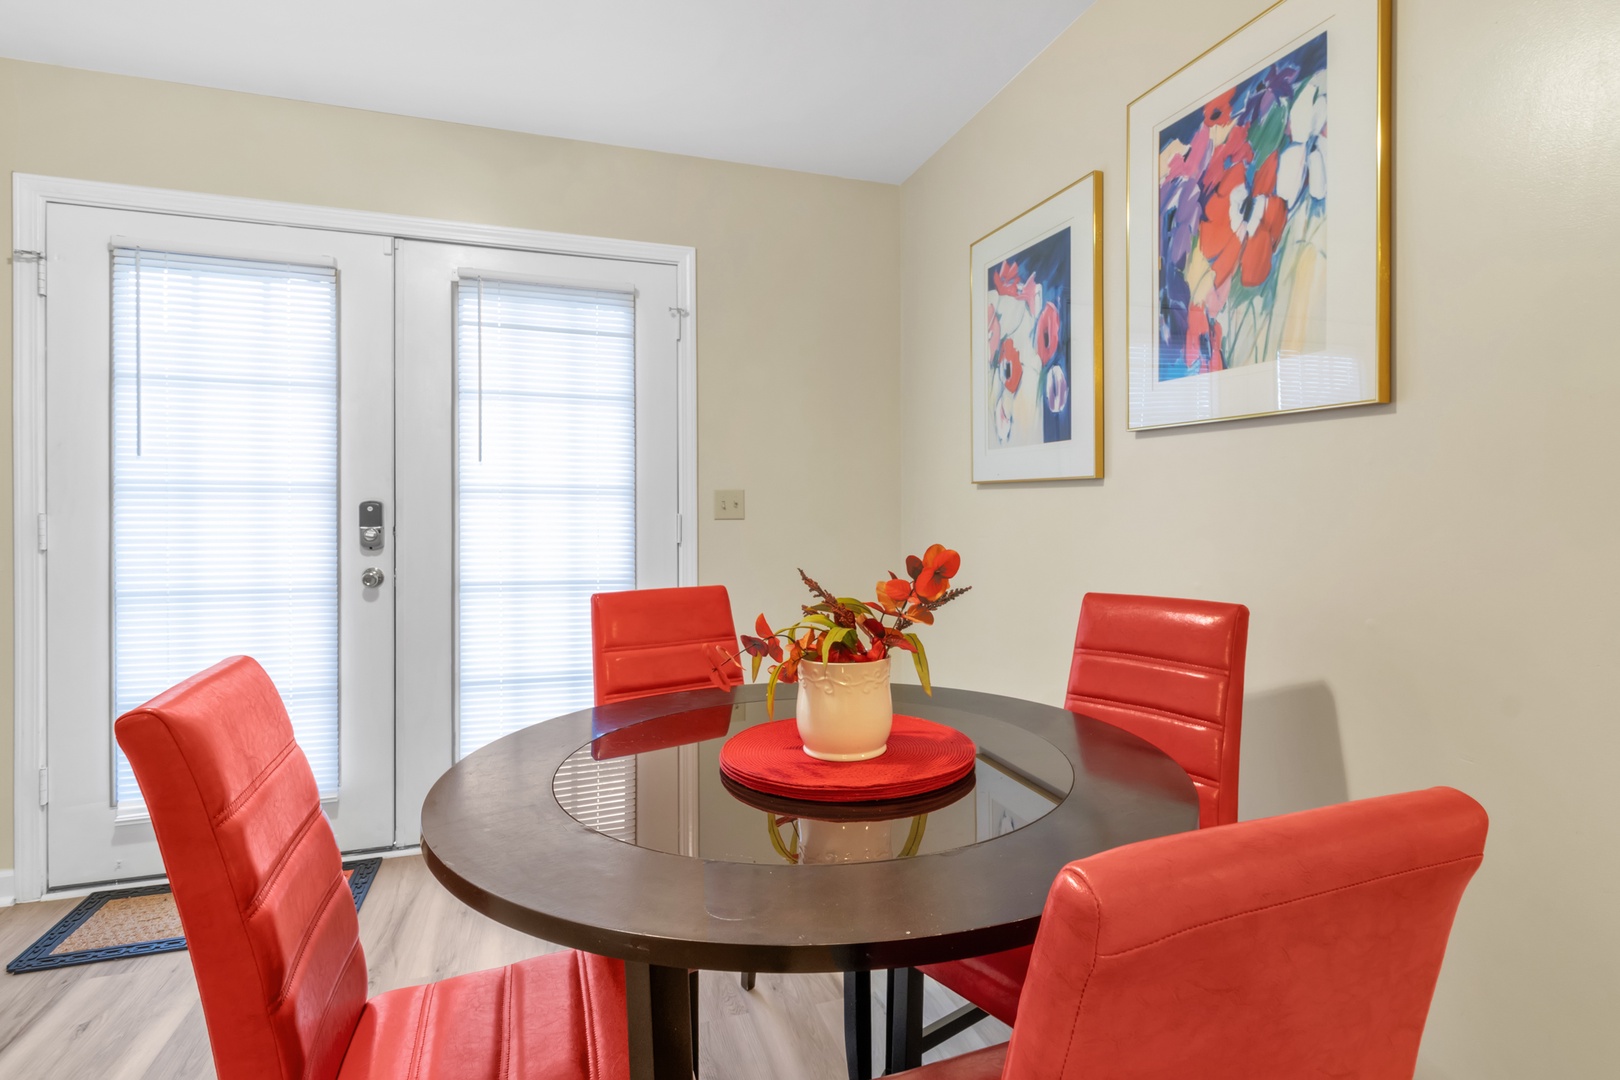 Enjoy a bite at the kitchen table, with seating for 4